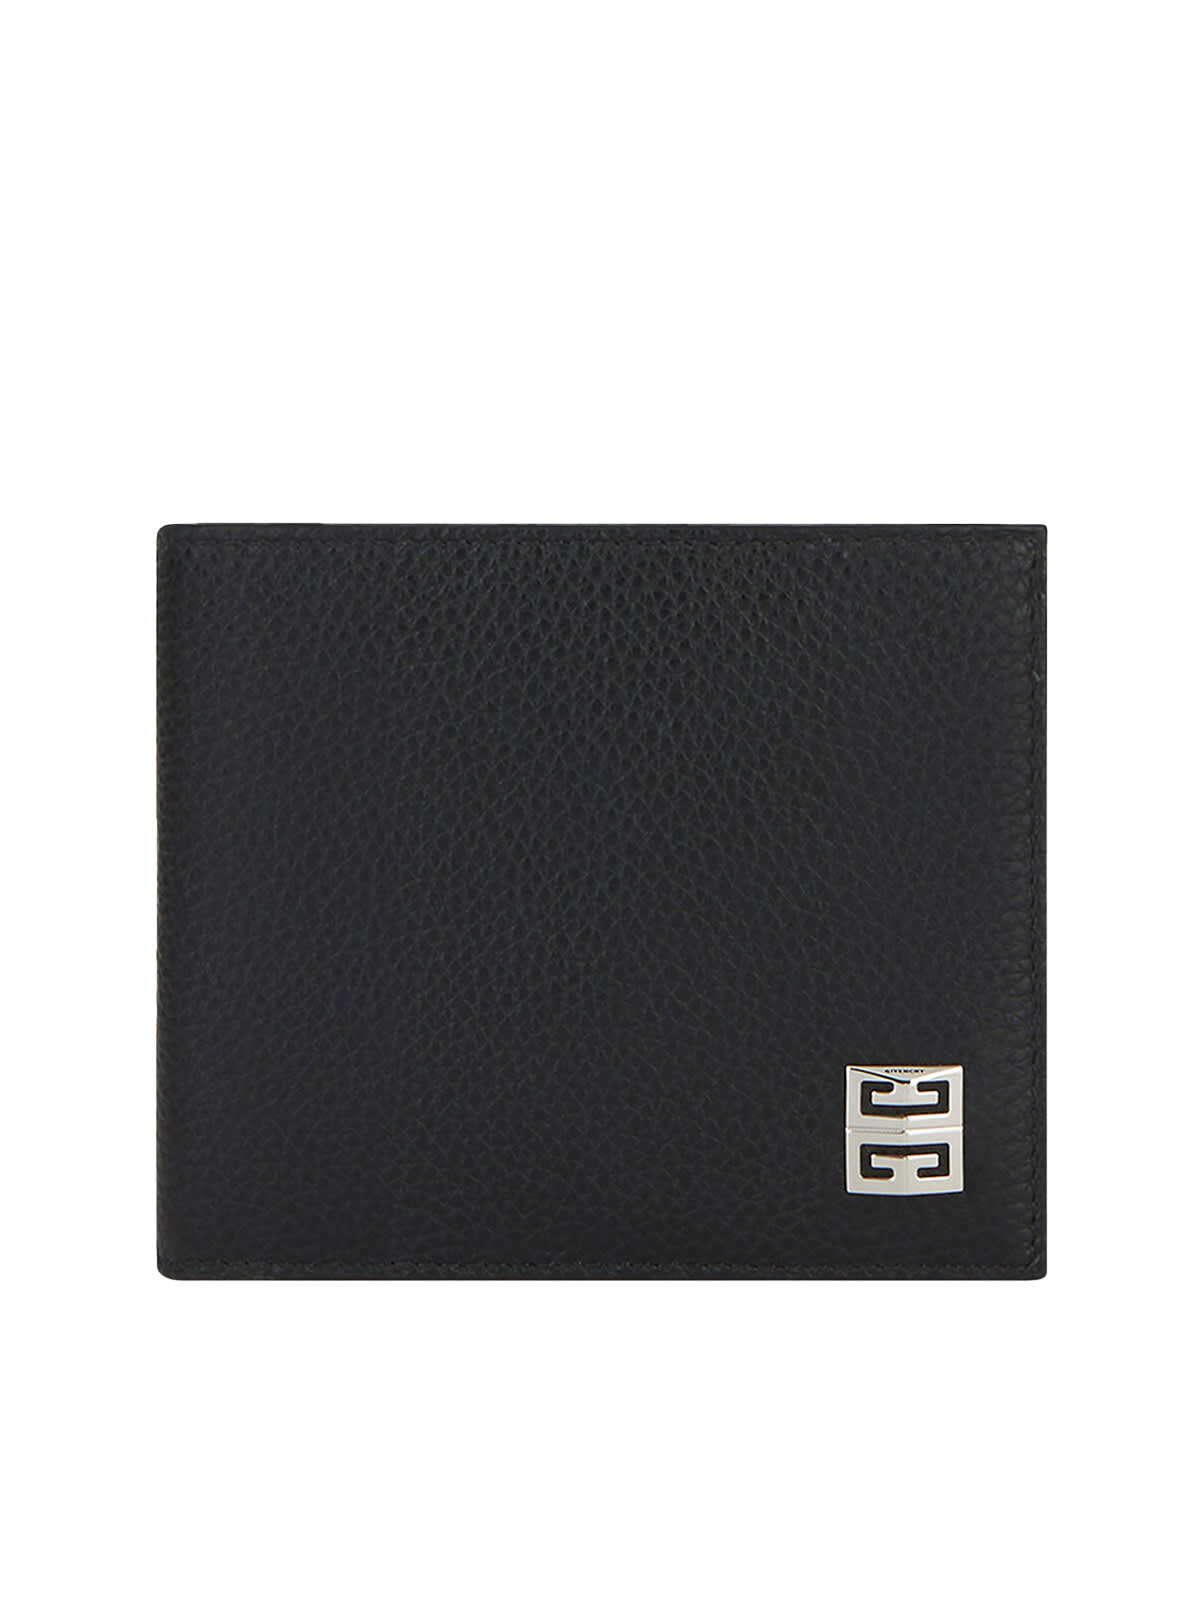 Givenchy 4cc Billfold Coin Wallet